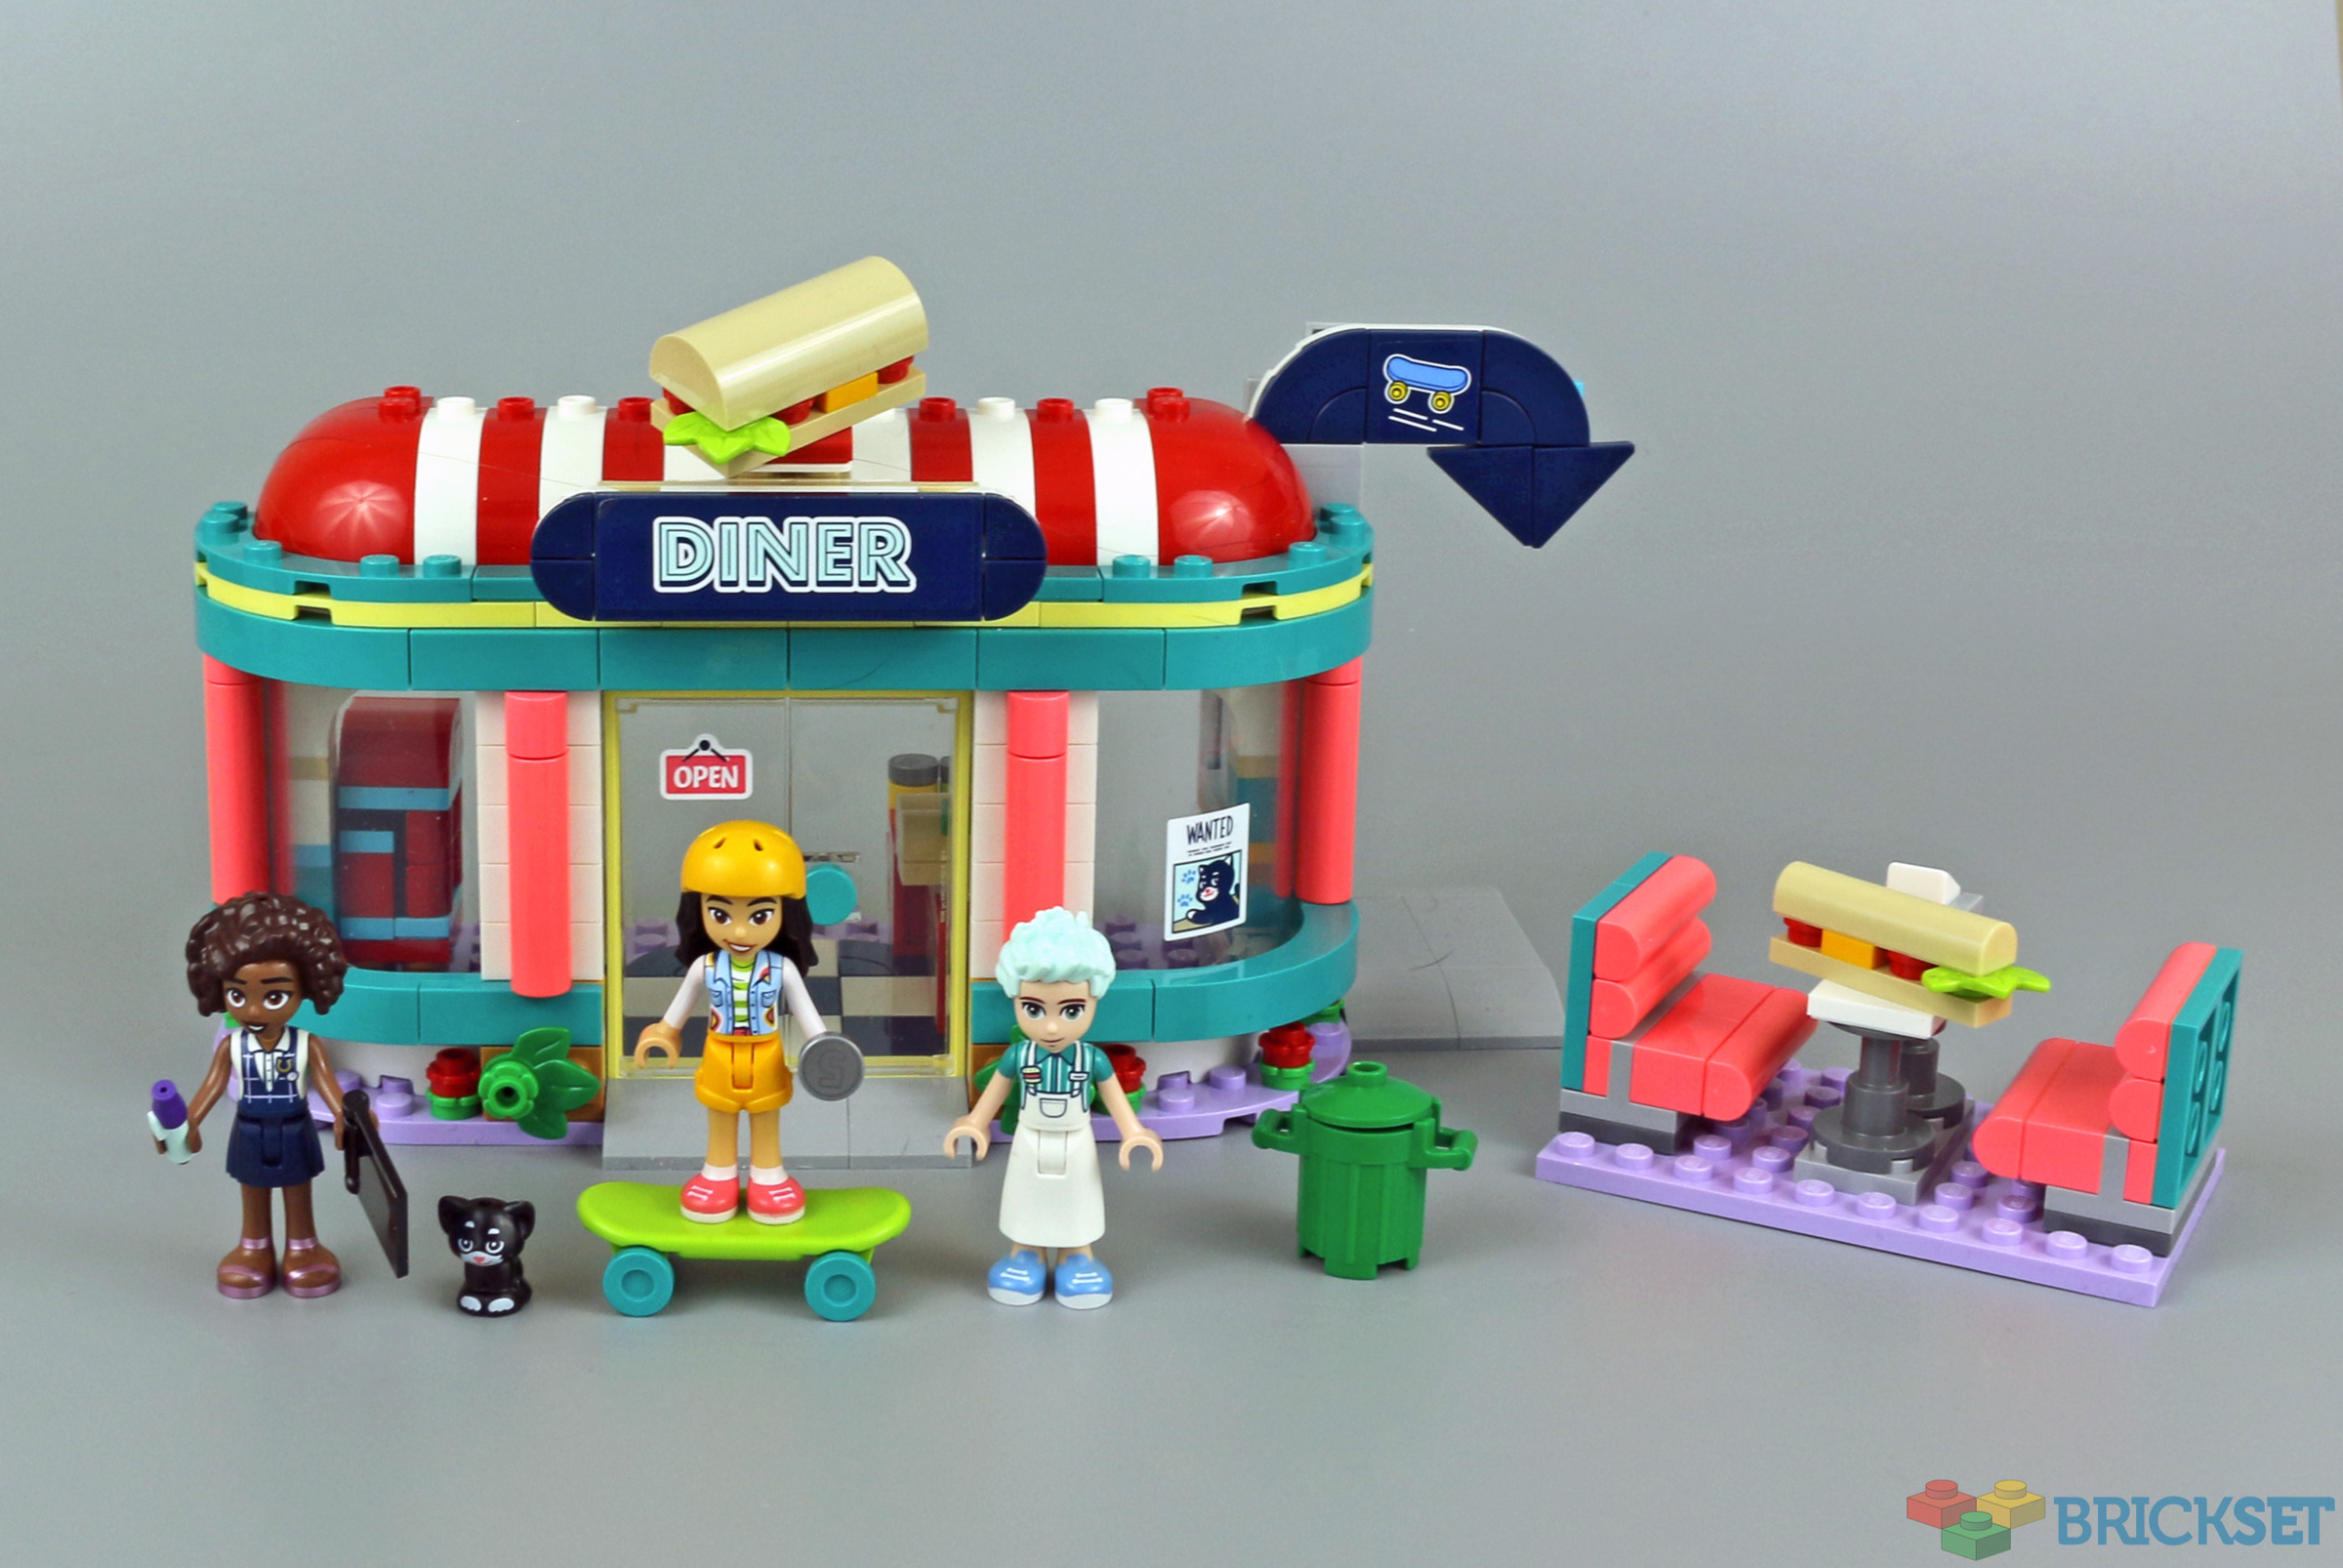 LEGO FRIENDS: City Park Cafe (3061) Pre-Owned w/box instructions